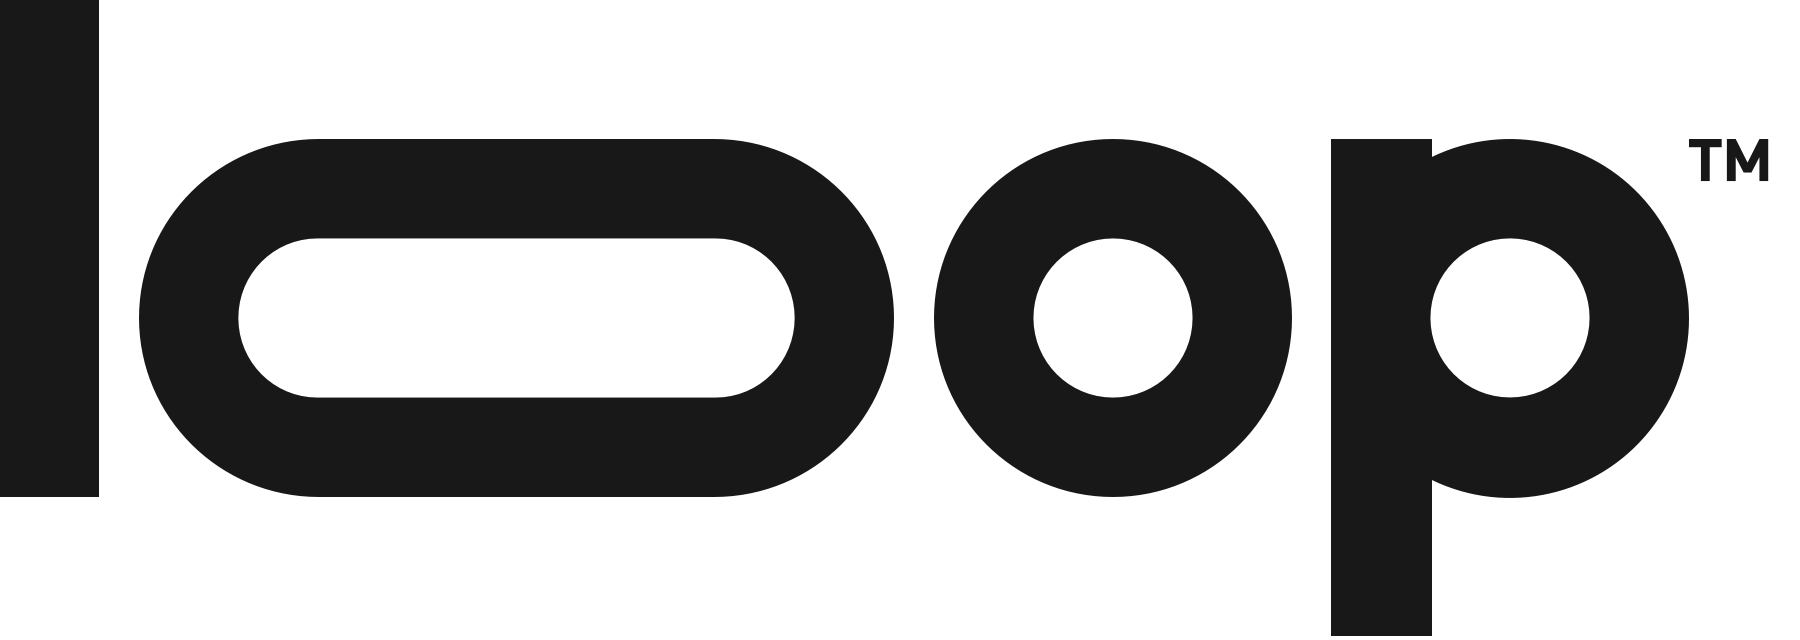 Loop Media Stock Shows Bullish Trajectory, Supported By Accelerating Market Penetration Into DOOH And Digital Signage Services Market ($LPTV)